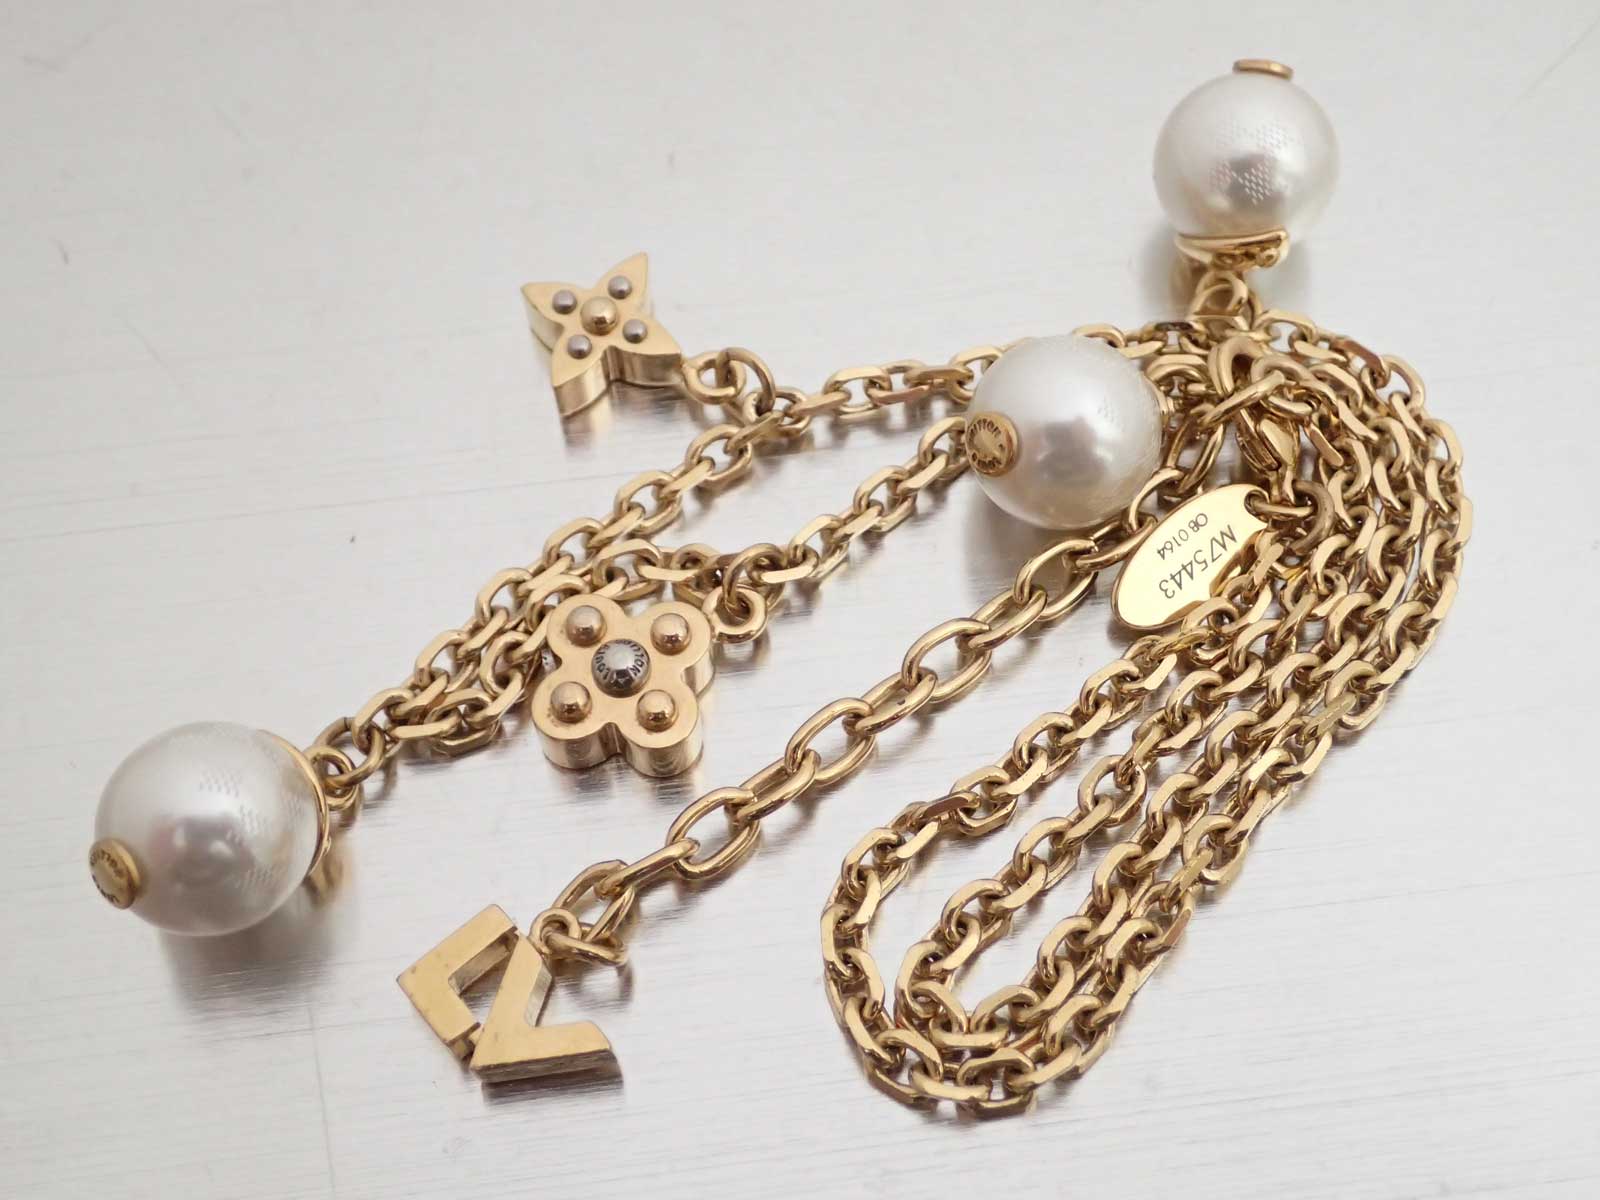 Auth Louis Vuitton Charmy Pearl Necklace White/Goldtone Faux Pearl/Metal e45313c | eBay